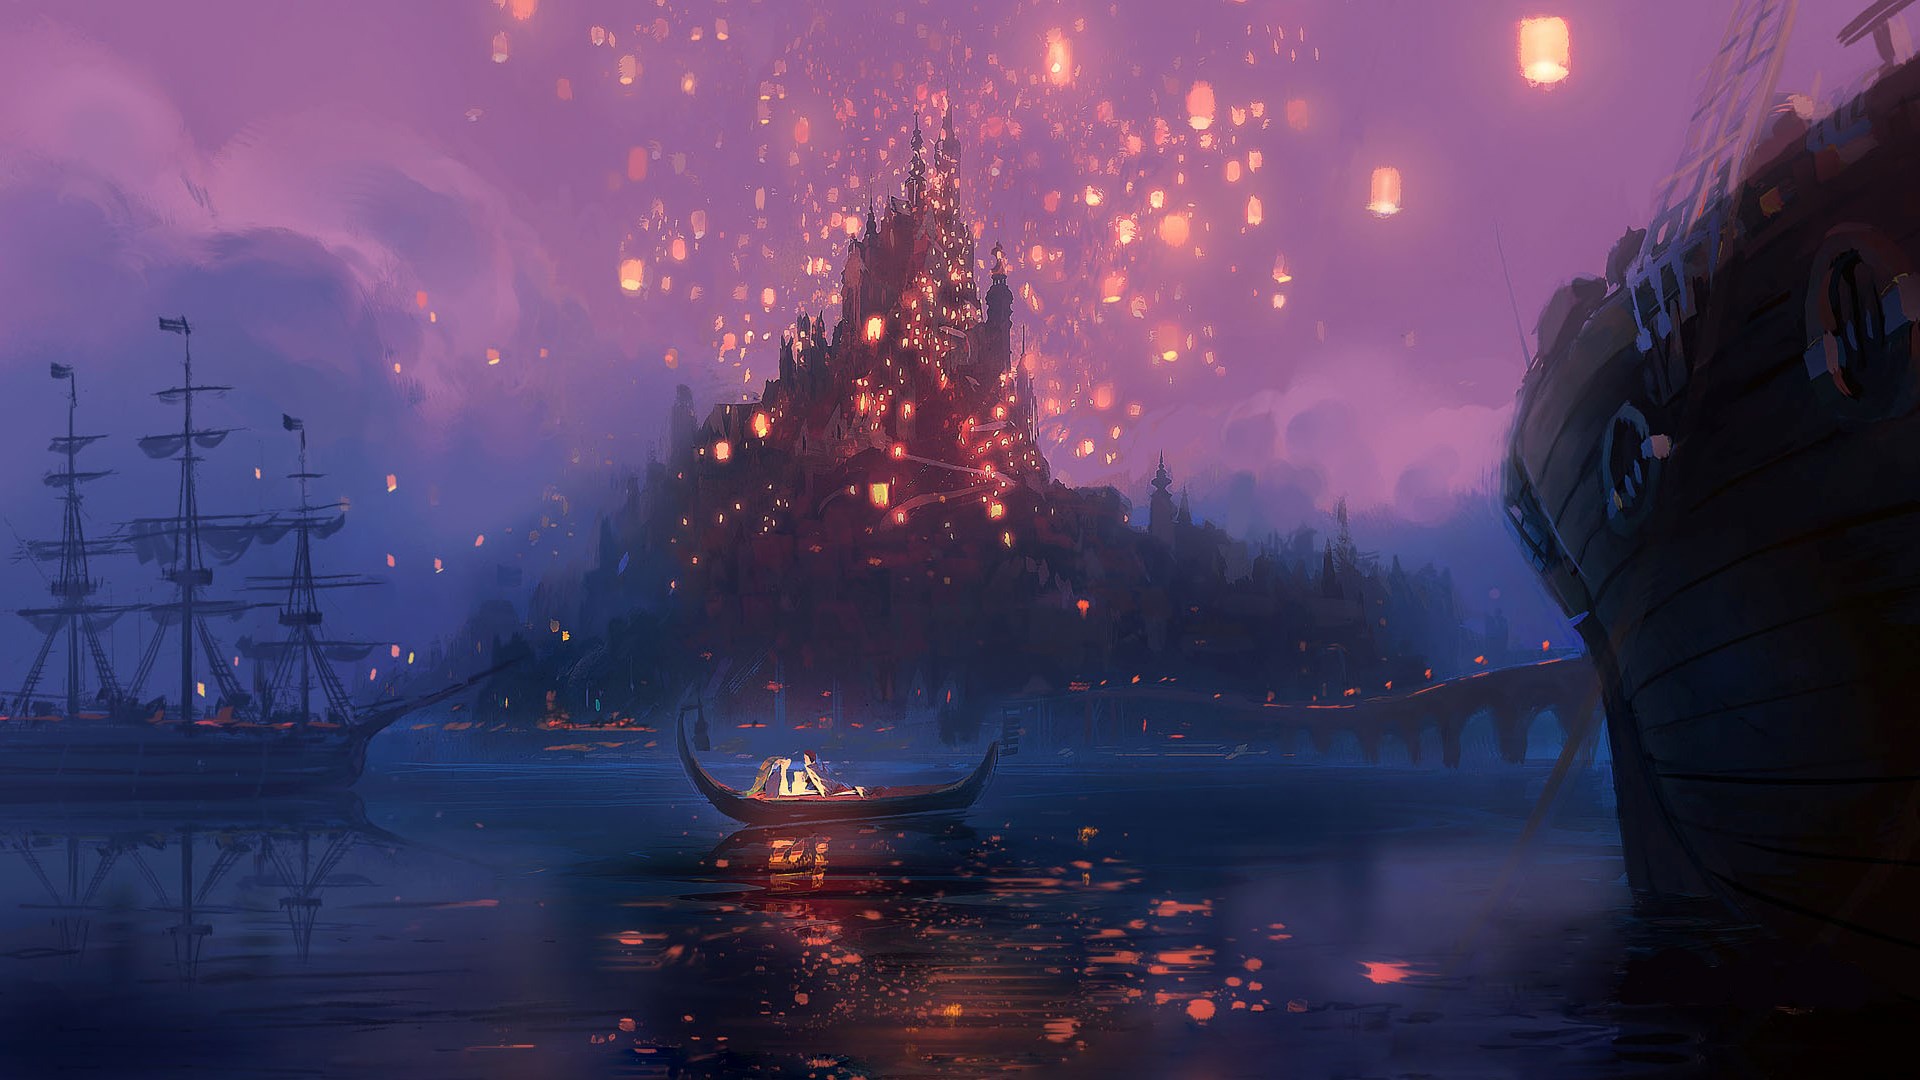 1920x1080 tangled : Wallpaper Collection JPG 364 kB Gallery HD Wallpaper